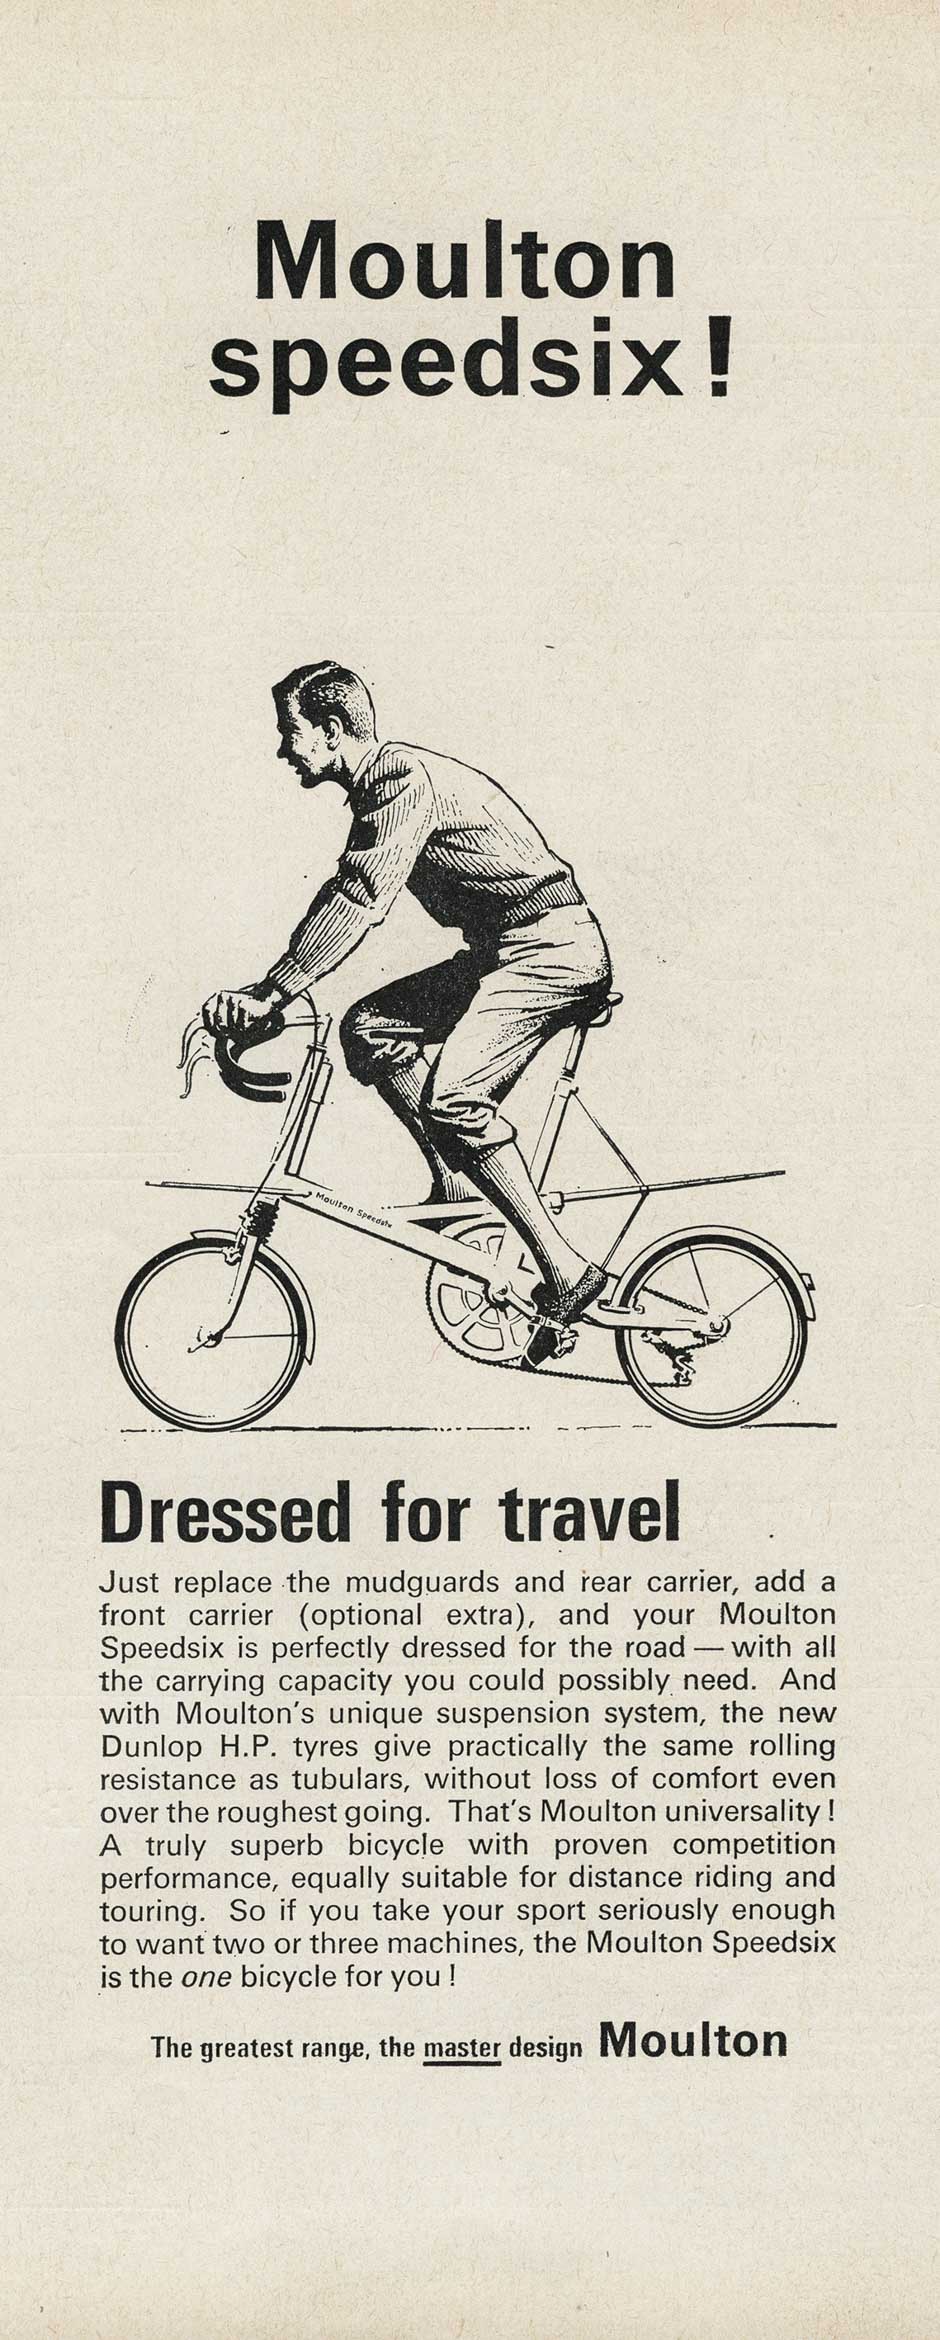 Sporting Cyclist October 1965 Moulton advert 02 main image